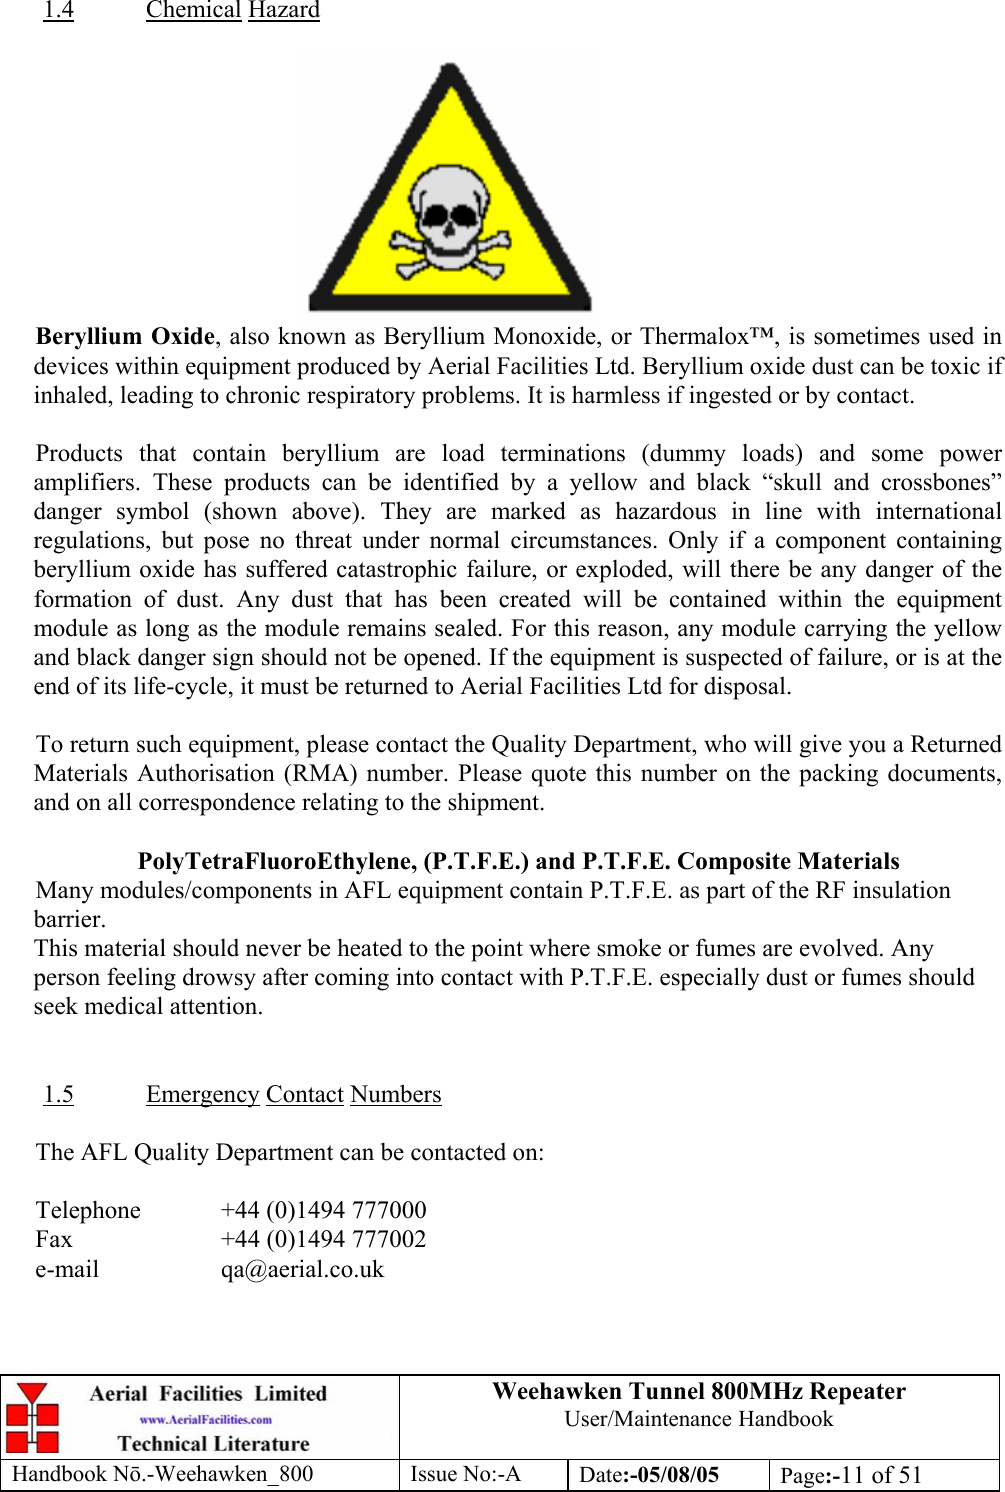 Weehawken Tunnel 800MHz Repeater User/Maintenance Handbook Handbook N.-Weehawken_800 Issue No:-A Date:-05/08/05  Page:-11 of 51   1.4 Chemical Hazard   Beryllium Oxide, also known as Beryllium Monoxide, or Thermalox™, is sometimes used in devices within equipment produced by Aerial Facilities Ltd. Beryllium oxide dust can be toxic if inhaled, leading to chronic respiratory problems. It is harmless if ingested or by contact.  Products that contain beryllium are load terminations (dummy loads) and some power amplifiers. These products can be identified by a yellow and black “skull and crossbones” danger symbol (shown above). They are marked as hazardous in line with international regulations, but pose no threat under normal circumstances. Only if a component containing beryllium oxide has suffered catastrophic failure, or exploded, will there be any danger of the formation of dust. Any dust that has been created will be contained within the equipment module as long as the module remains sealed. For this reason, any module carrying the yellow and black danger sign should not be opened. If the equipment is suspected of failure, or is at the end of its life-cycle, it must be returned to Aerial Facilities Ltd for disposal.  To return such equipment, please contact the Quality Department, who will give you a Returned Materials Authorisation (RMA) number. Please quote this number on the packing documents, and on all correspondence relating to the shipment.  PolyTetraFluoroEthylene, (P.T.F.E.) and P.T.F.E. Composite Materials Many modules/components in AFL equipment contain P.T.F.E. as part of the RF insulation barrier. This material should never be heated to the point where smoke or fumes are evolved. Any person feeling drowsy after coming into contact with P.T.F.E. especially dust or fumes should seek medical attention.   1.5 Emergency Contact Numbers  The AFL Quality Department can be contacted on:  Telephone   +44 (0)1494 777000 Fax    +44 (0)1494 777002 e-mail   qa@aerial.co.uk  